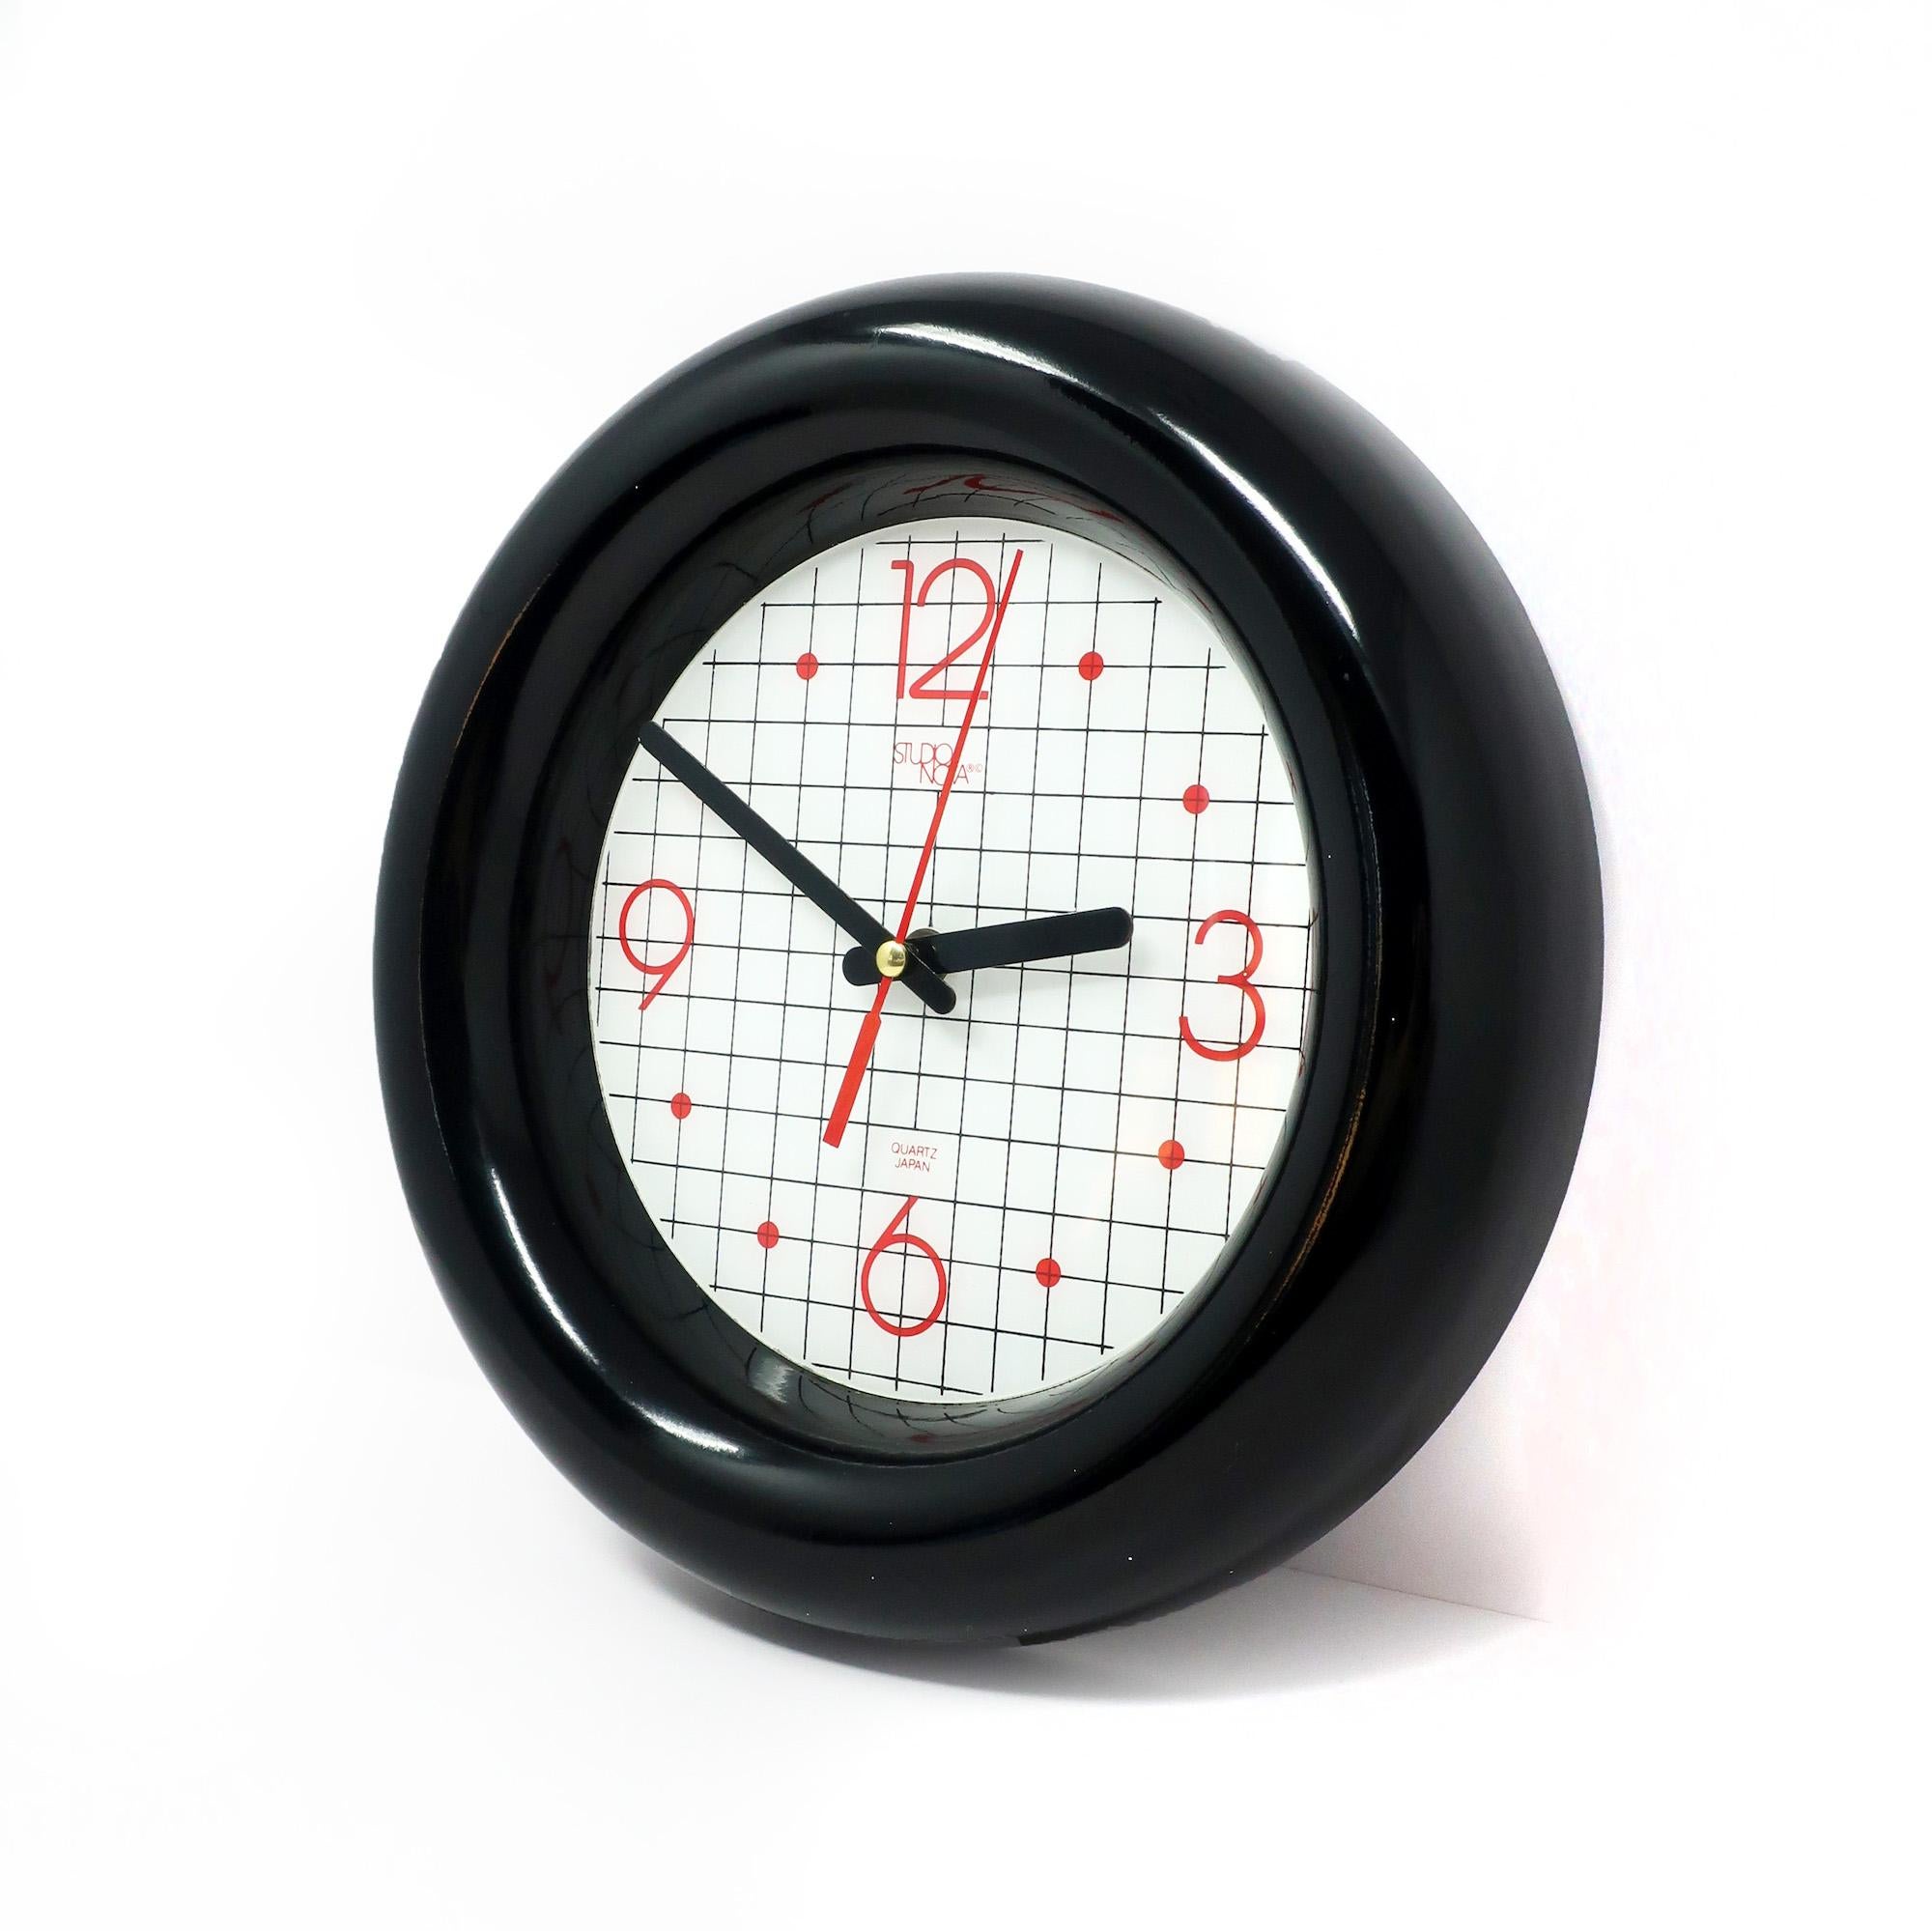 A very cool and unique 1980s wall clock by Studio Nova Japan with a cartoonish black border, white face with black grid lines, red numbers and black and red hands.  Will look great in your office, living room or kitchen!

In very good vintage